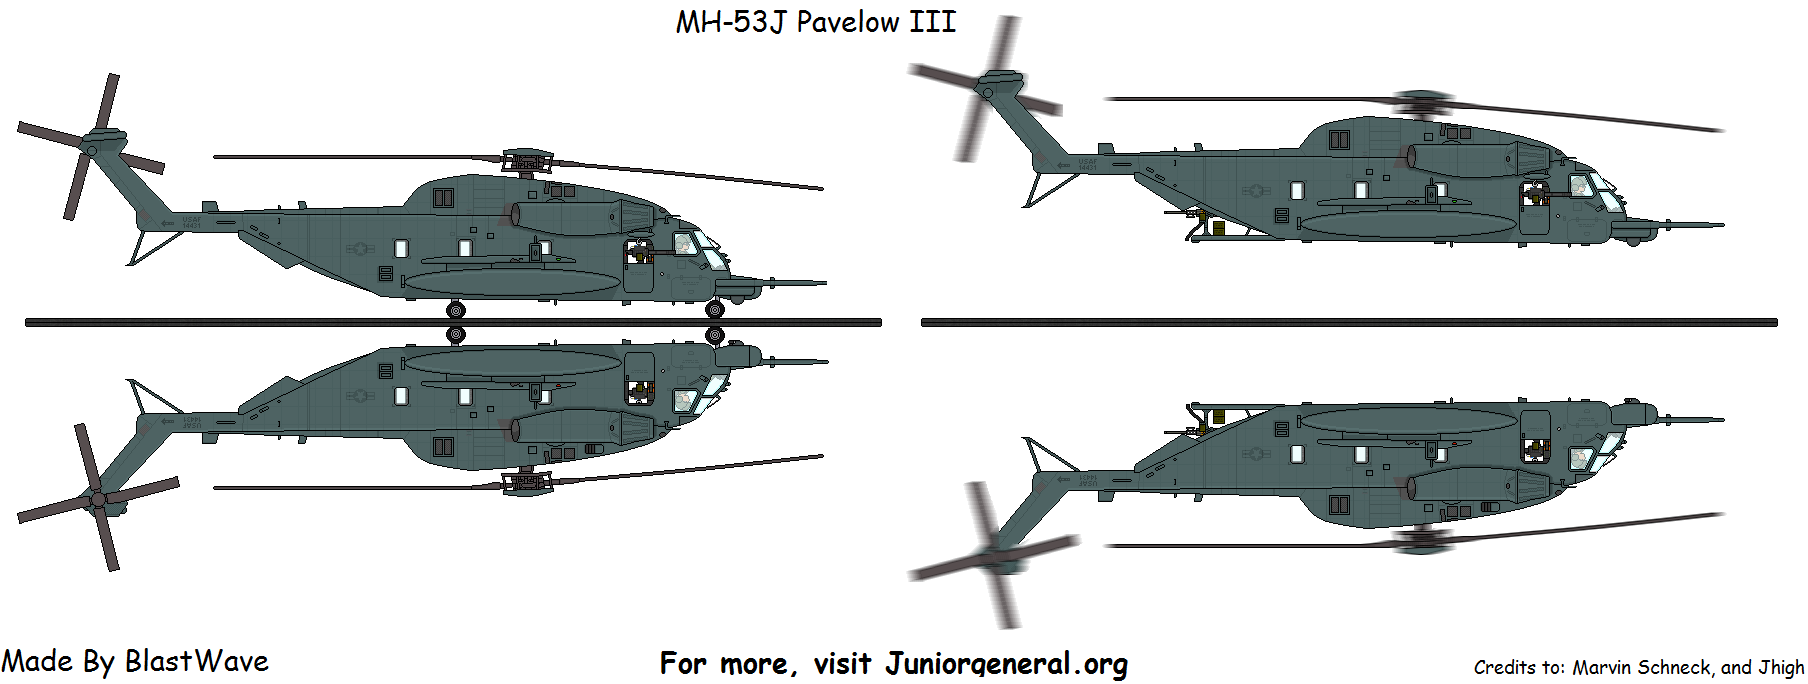 Sikorsky MH-53J Pave Low III Helicopter